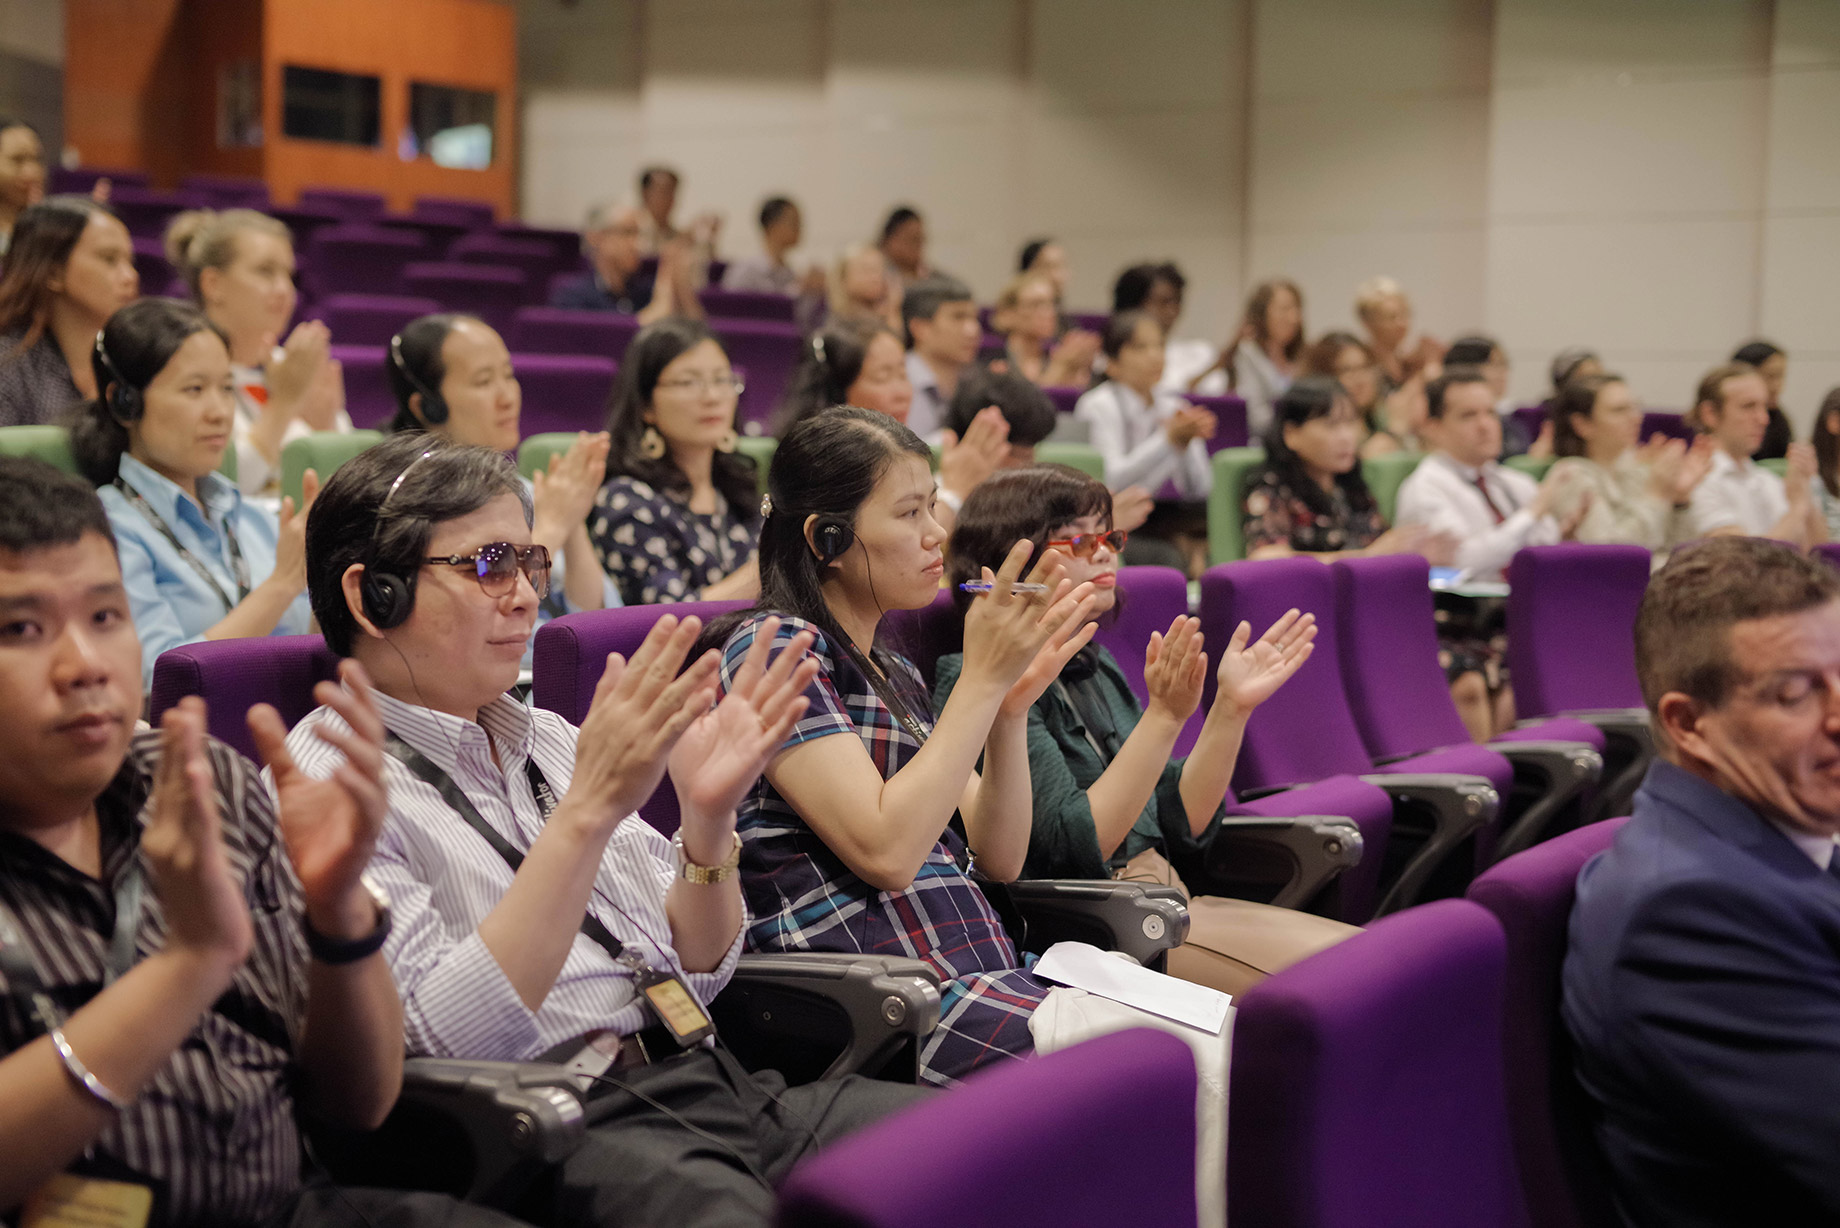 The ‘Accessibility & Inclusion Practices in Higher Education in Vietnam’ conference at RMIT University Vietnam was organised based on the inclusive and accessible practices with special supports and services for participants with different needs.